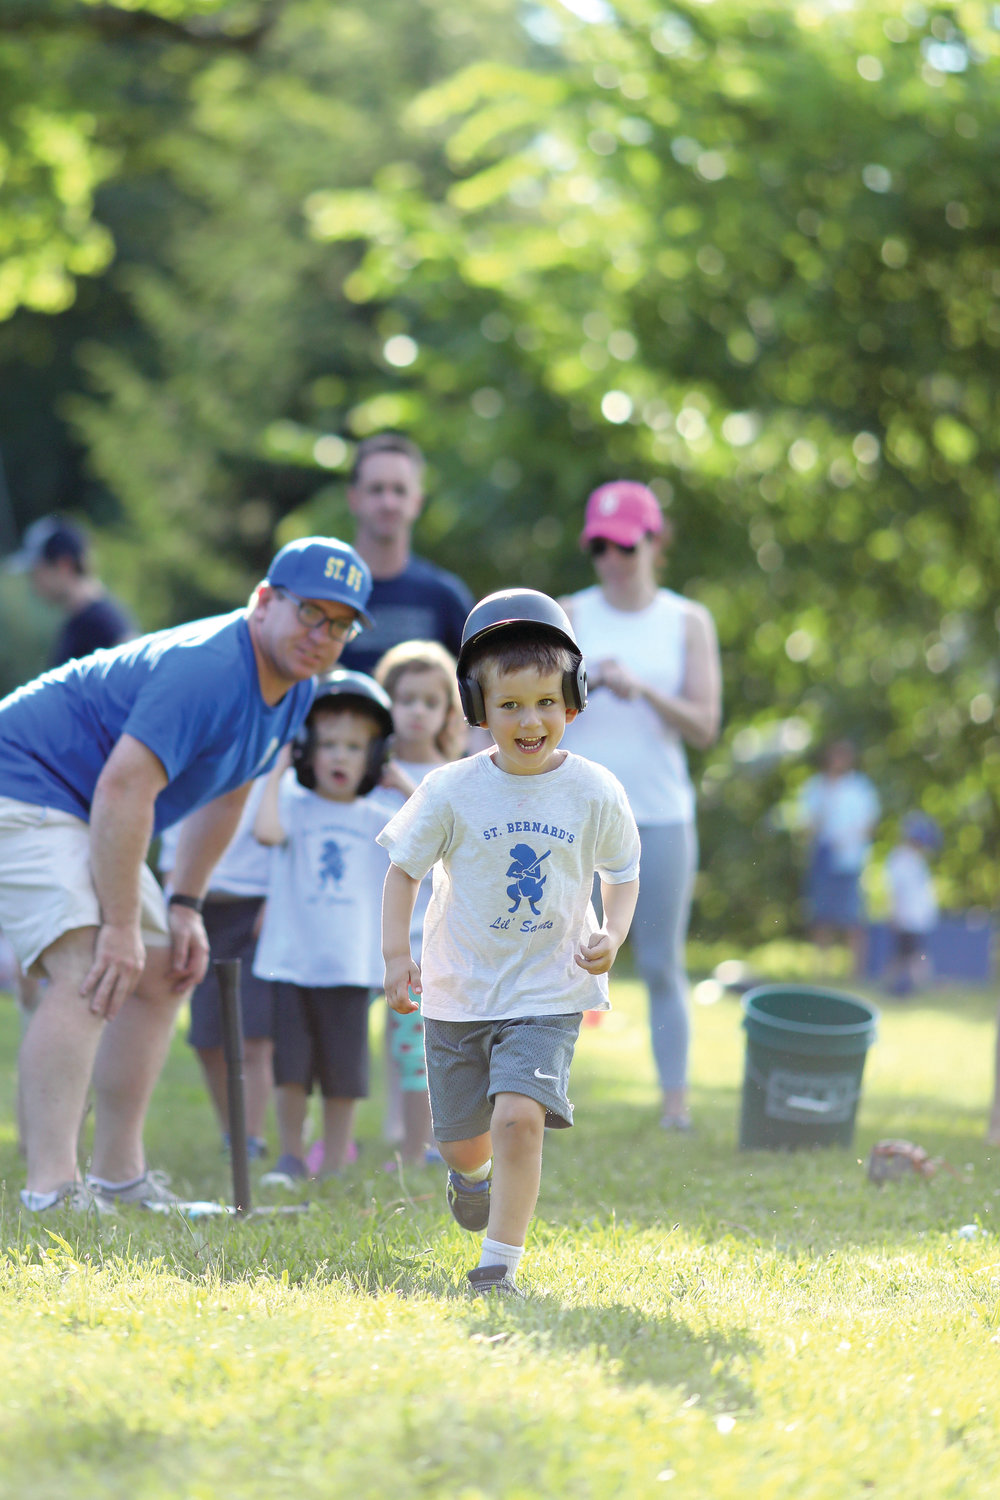 Coach Ed Cooney, a parishioner at St. Bernard Church in North Kingstown, helps 3 to 6-year-old “Lil Saints” learn the basics of baseball at St. Bernard’s tee-ball program which ran throughout June.